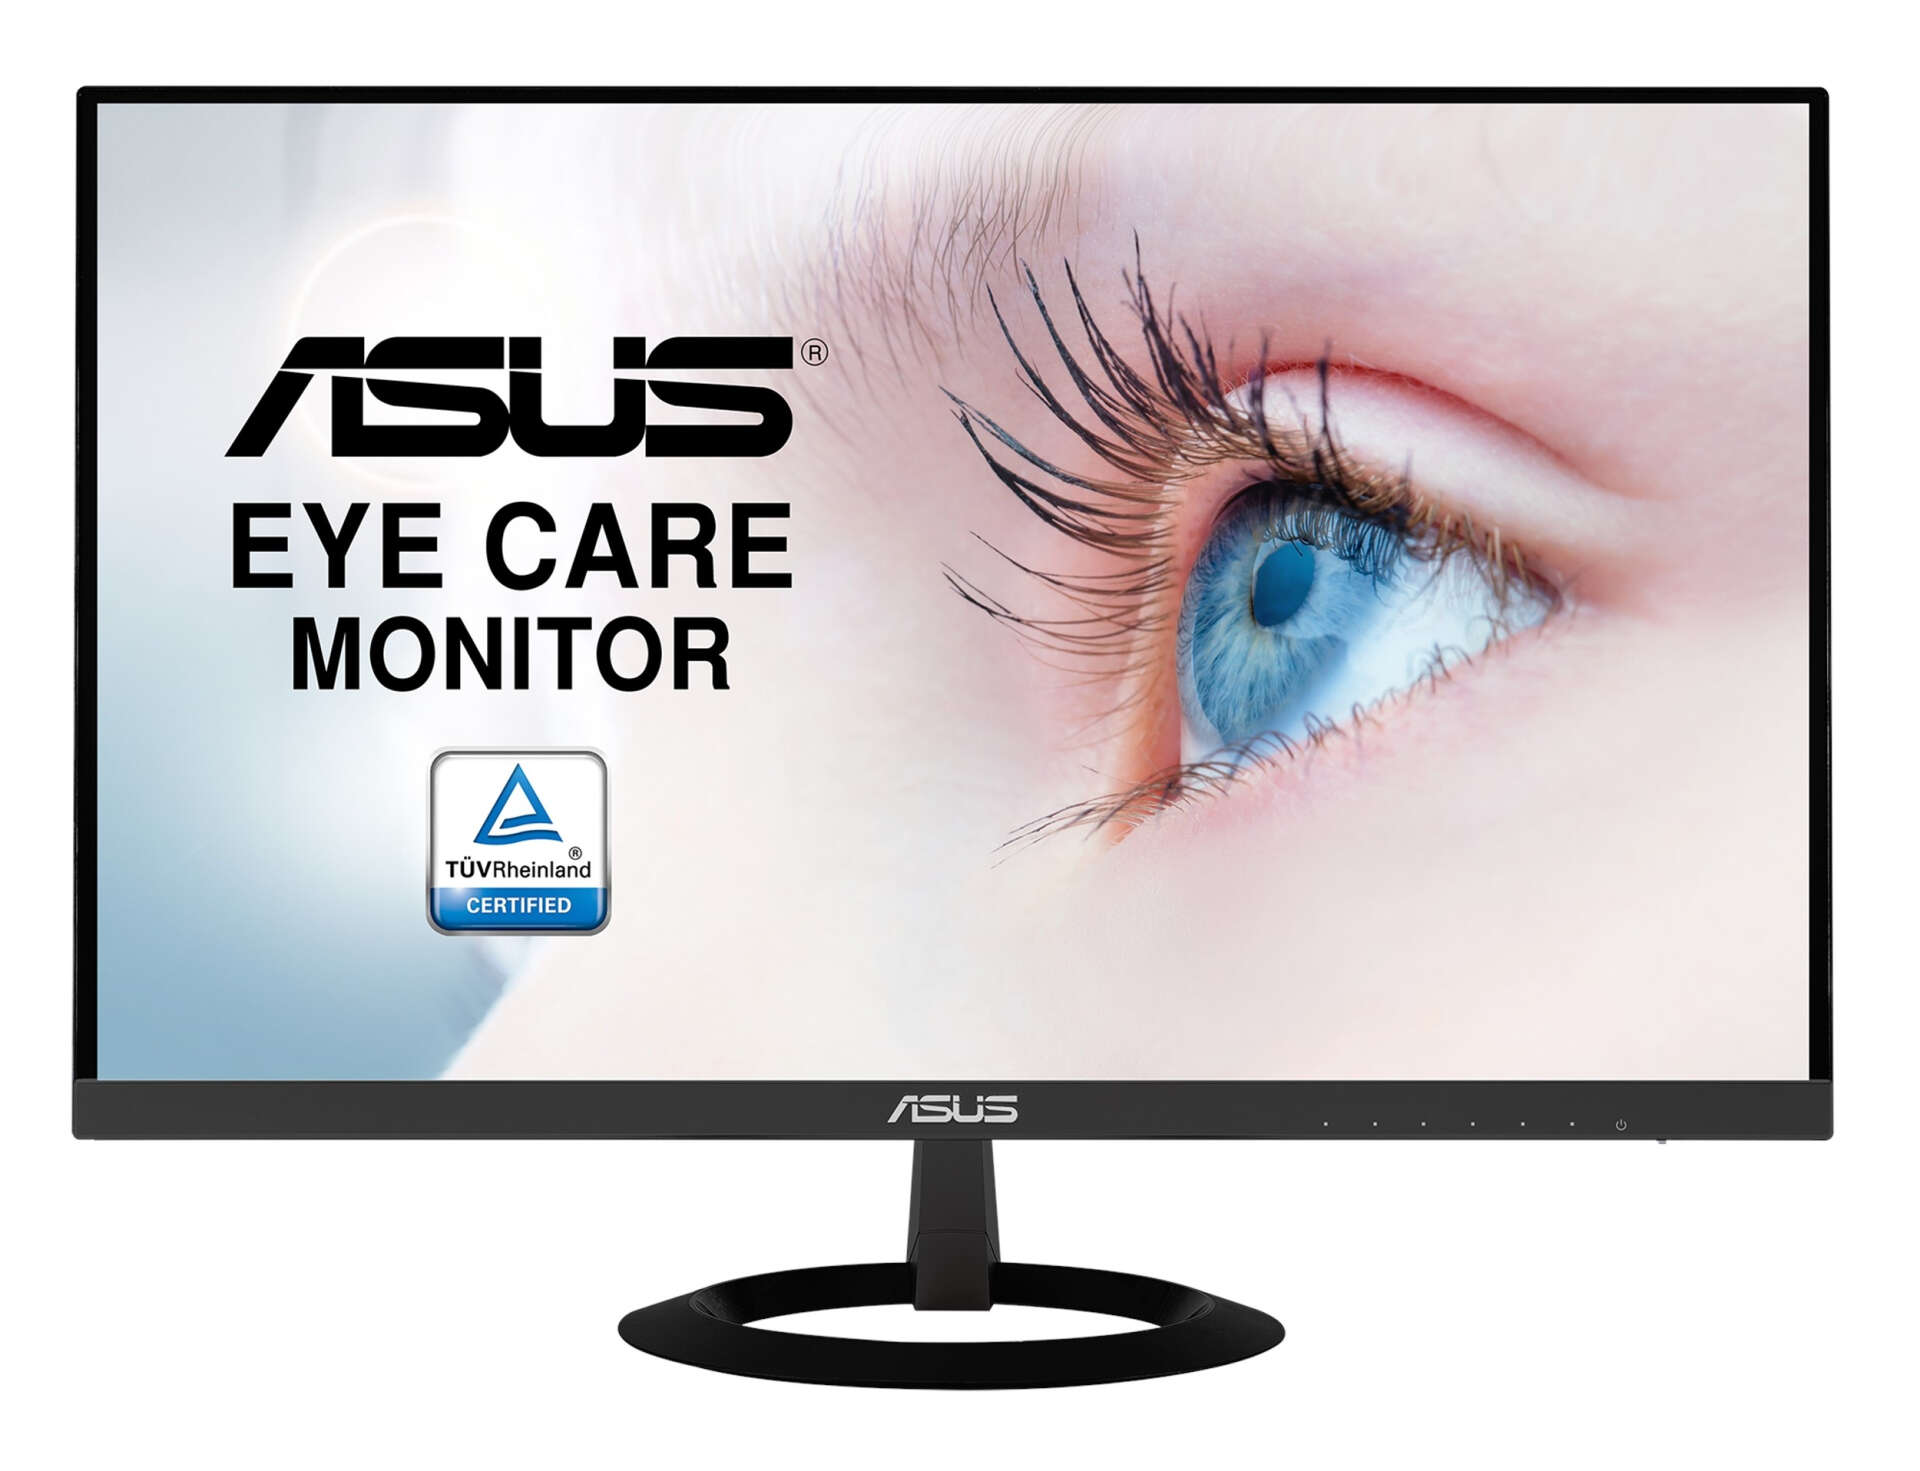 Asus vz279he eye care monitor 27" ips, 1920x1080, 2xhdmi, d-sub